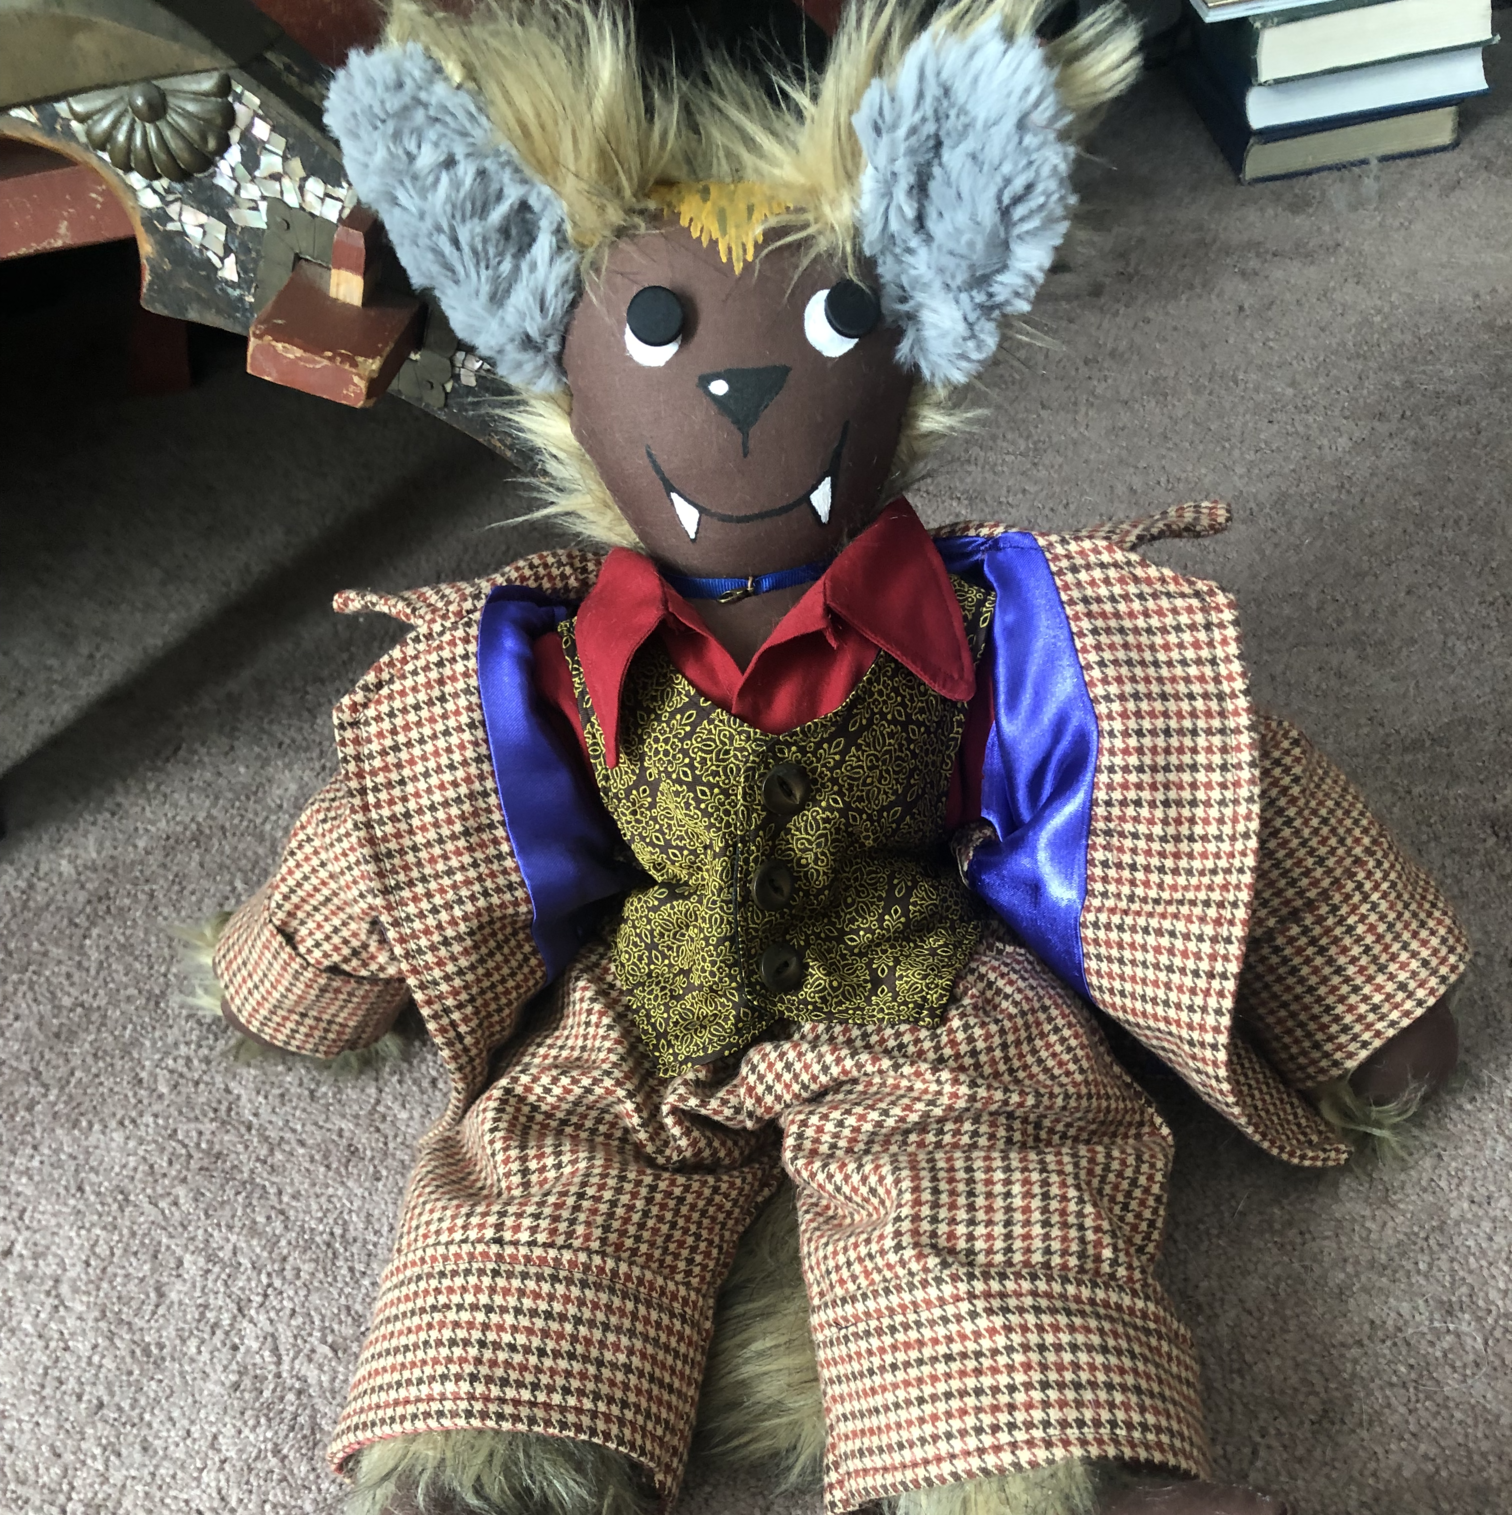 A rag doll of a fluffy wolf-man character in a brown suit and gold vest. Link takes you to project page.